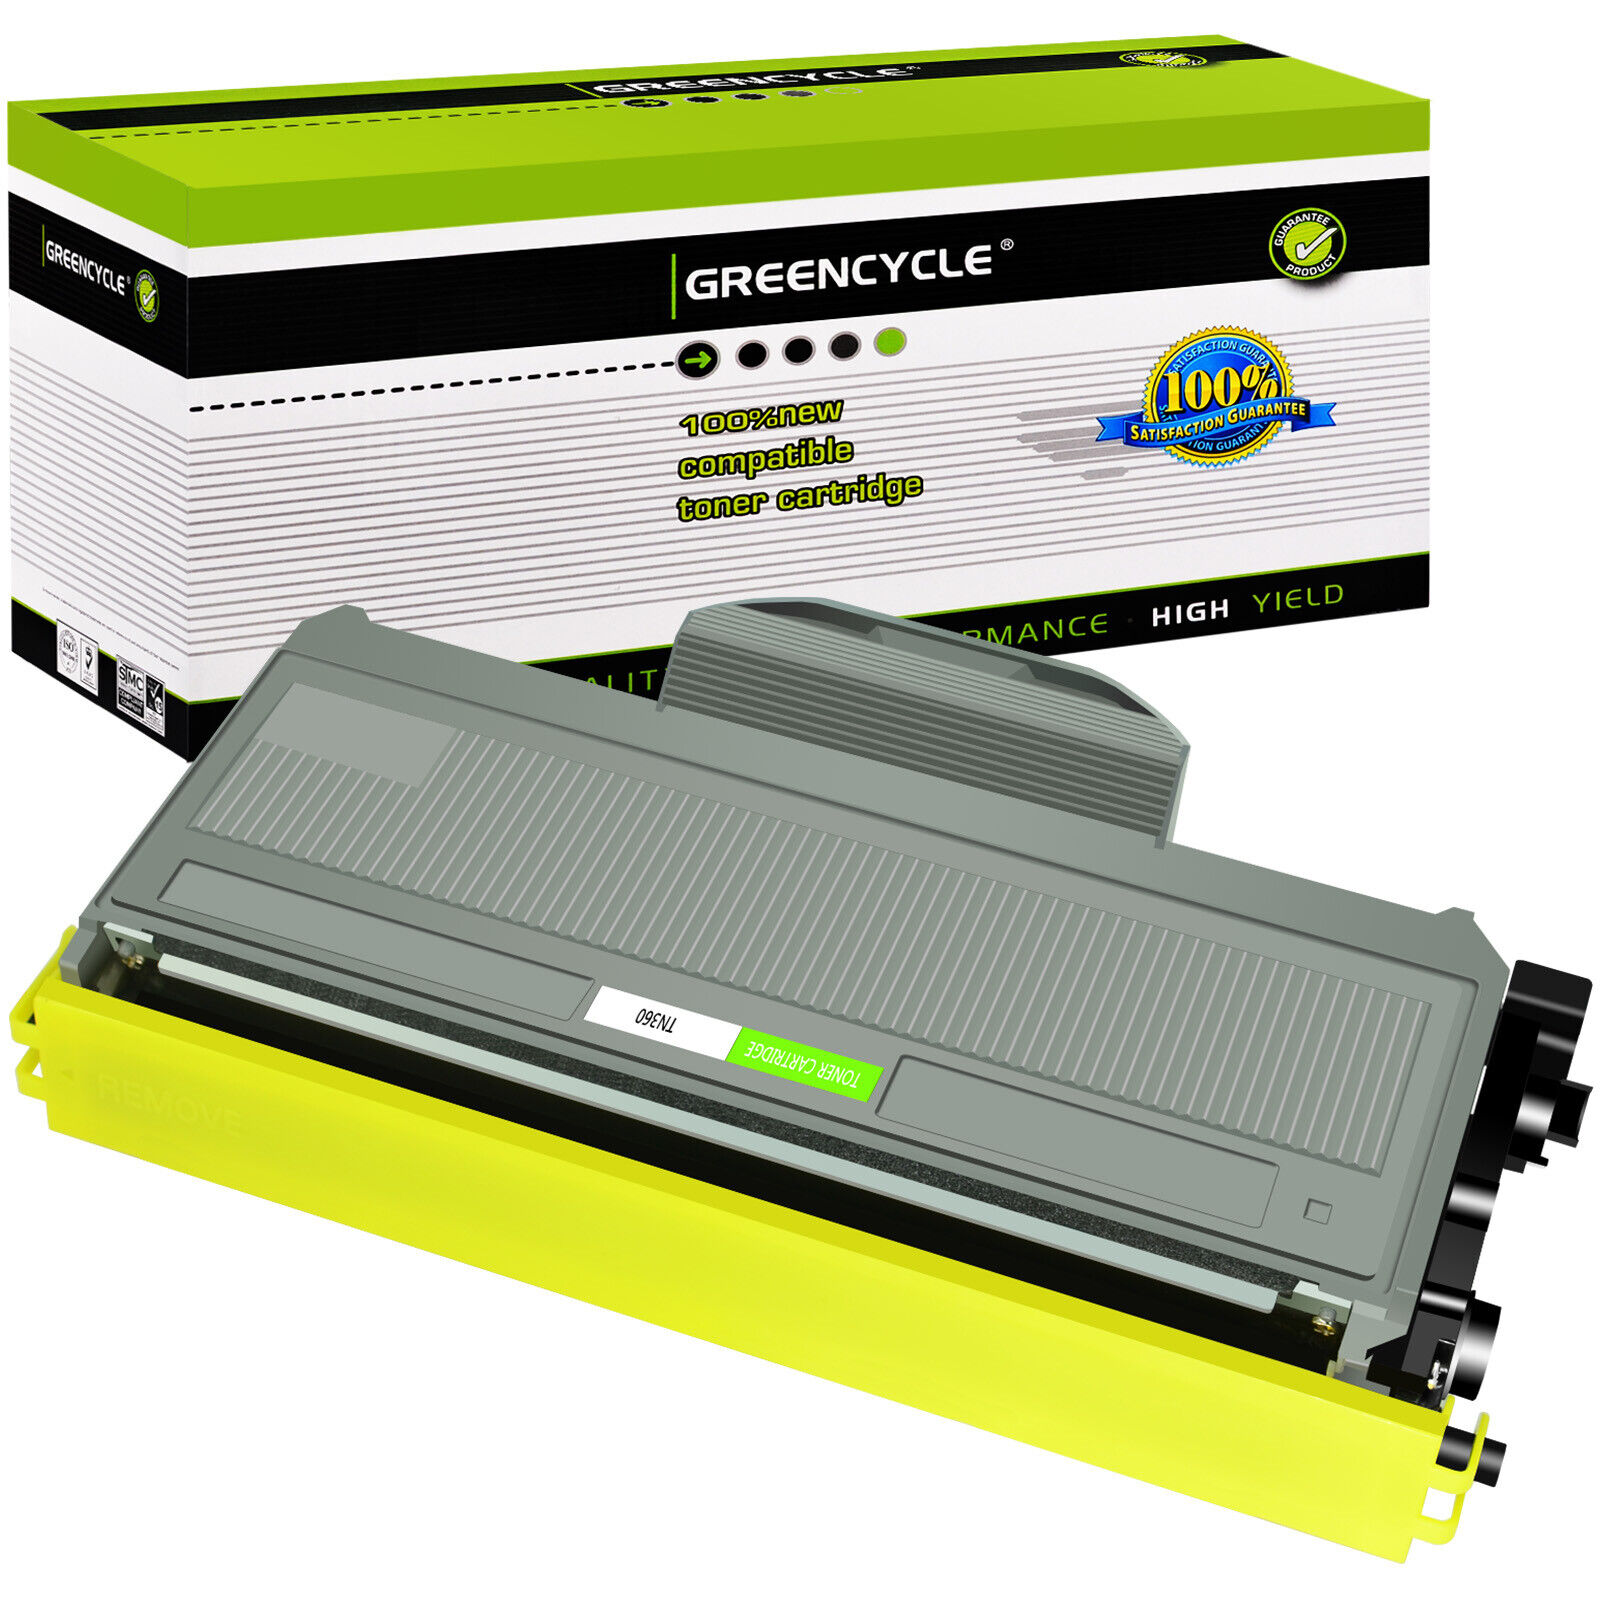 1pk TN360 Toner Cartridge 330 For Brother MFC-7320R MFC-7345N MFC-7440N 7840W